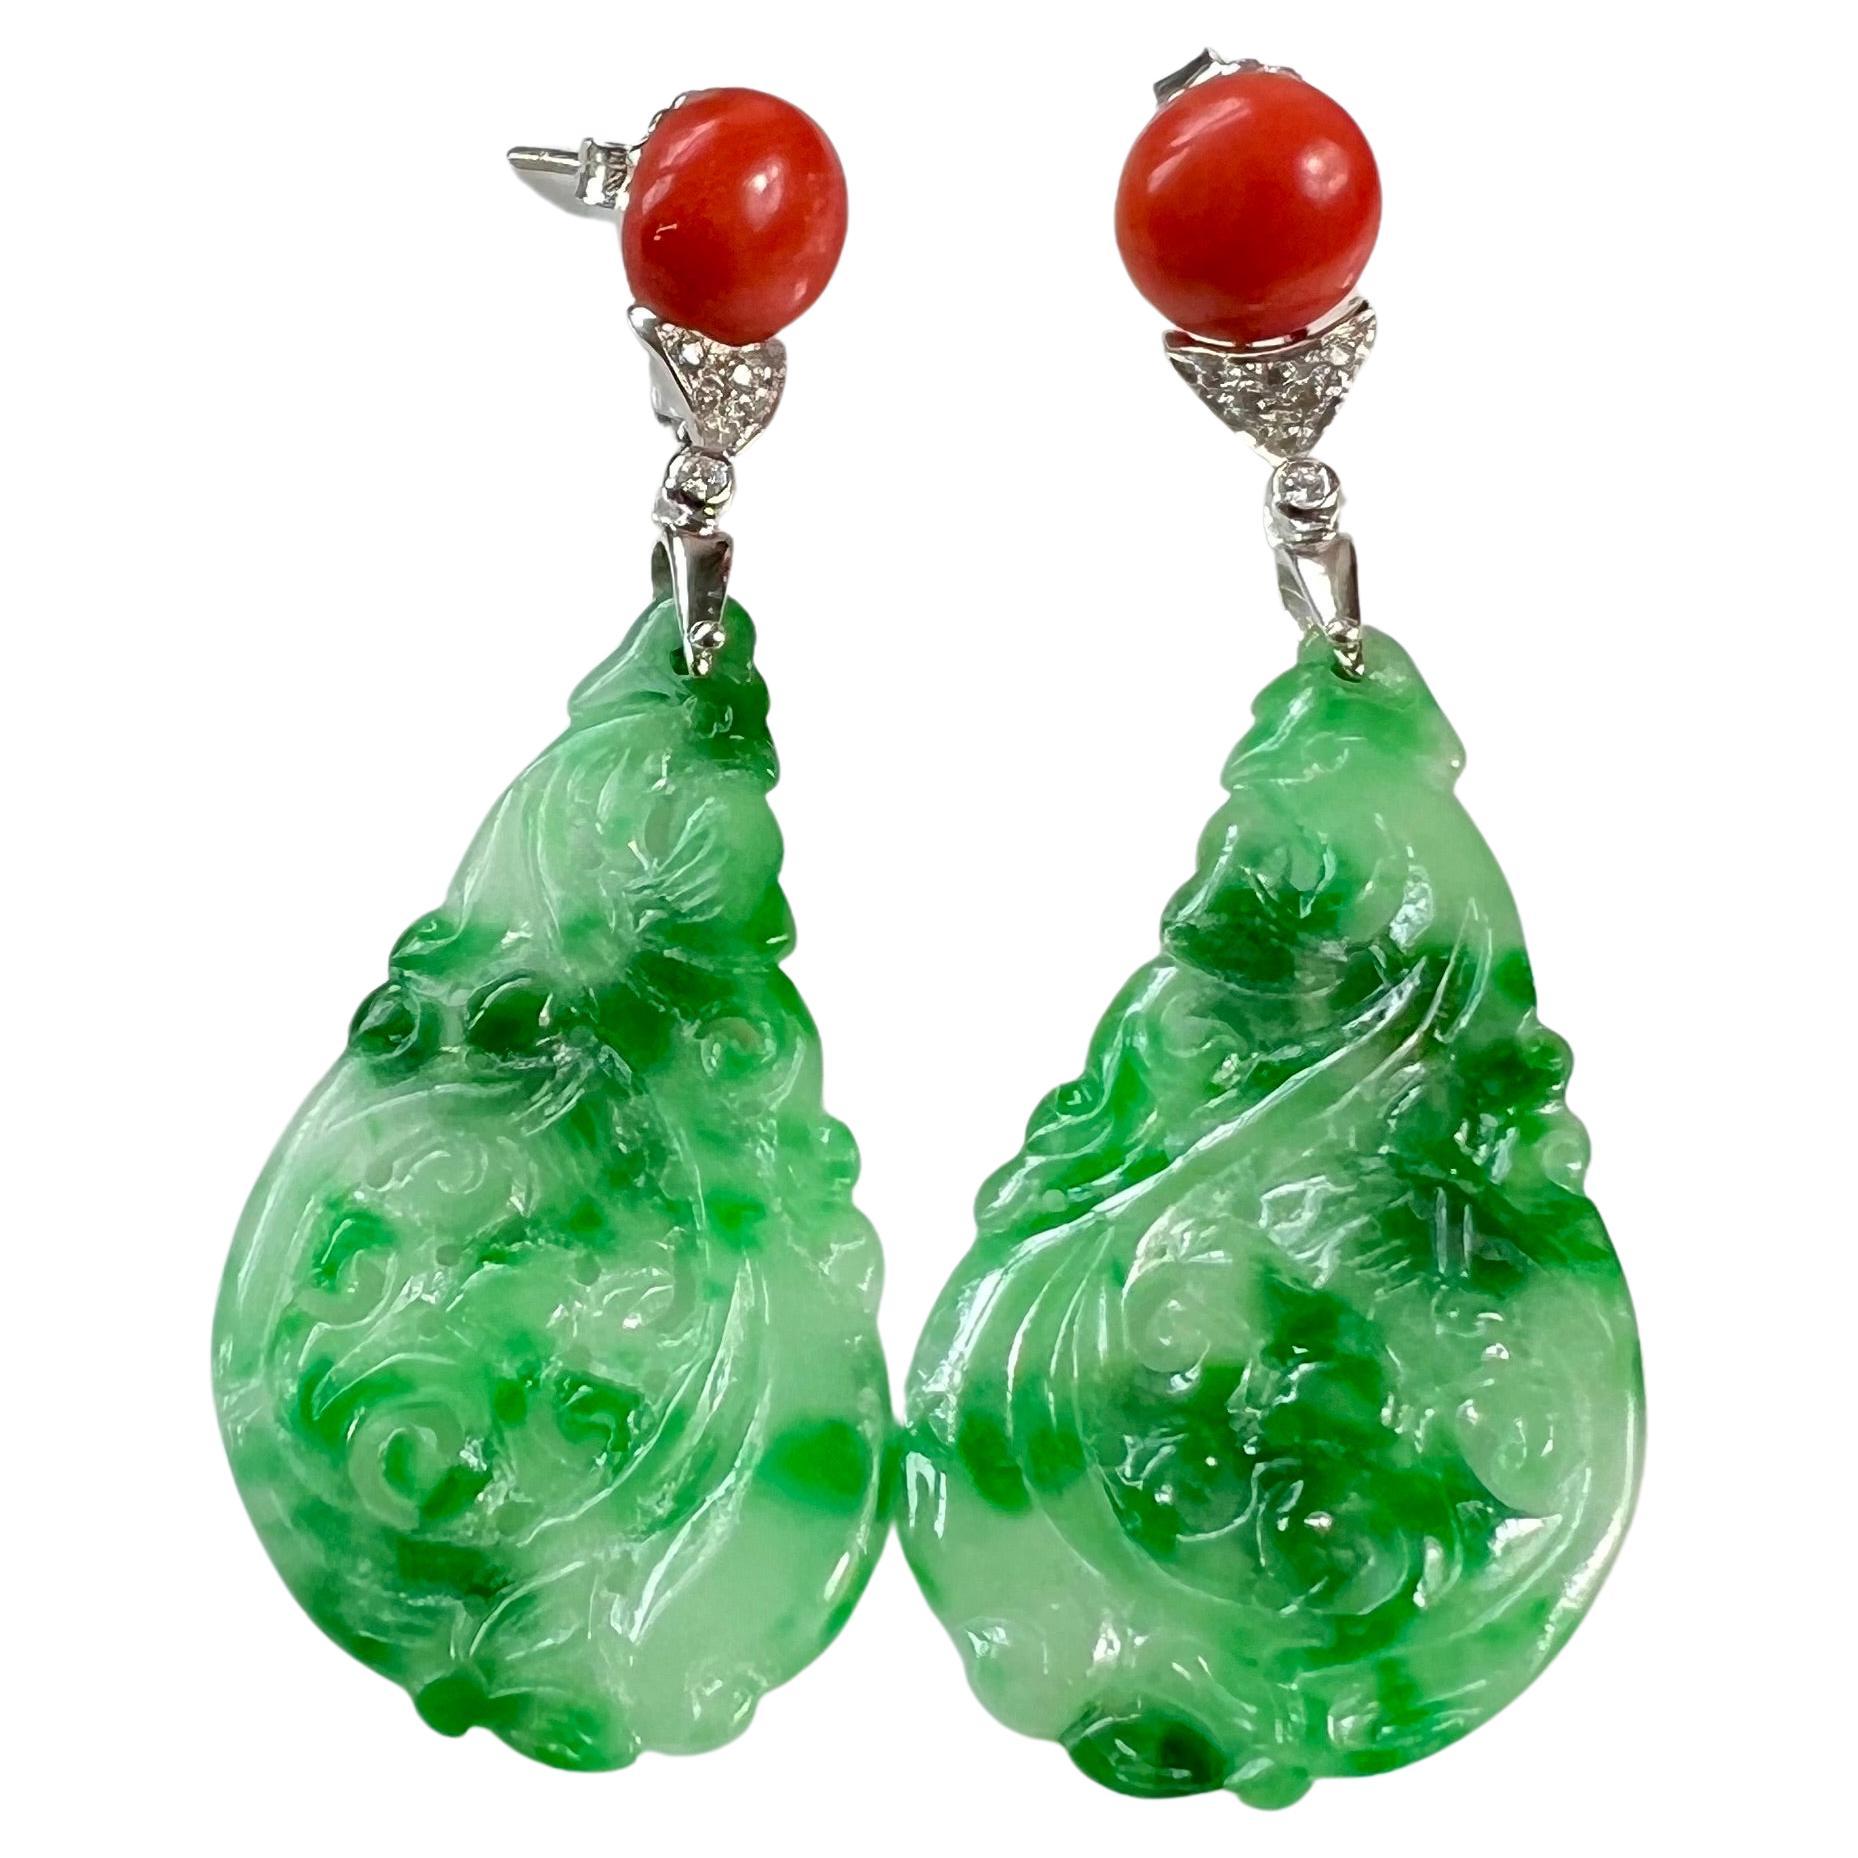 Carved Jadeite, Coral and Diamond Earrings in 18 Karat Gold